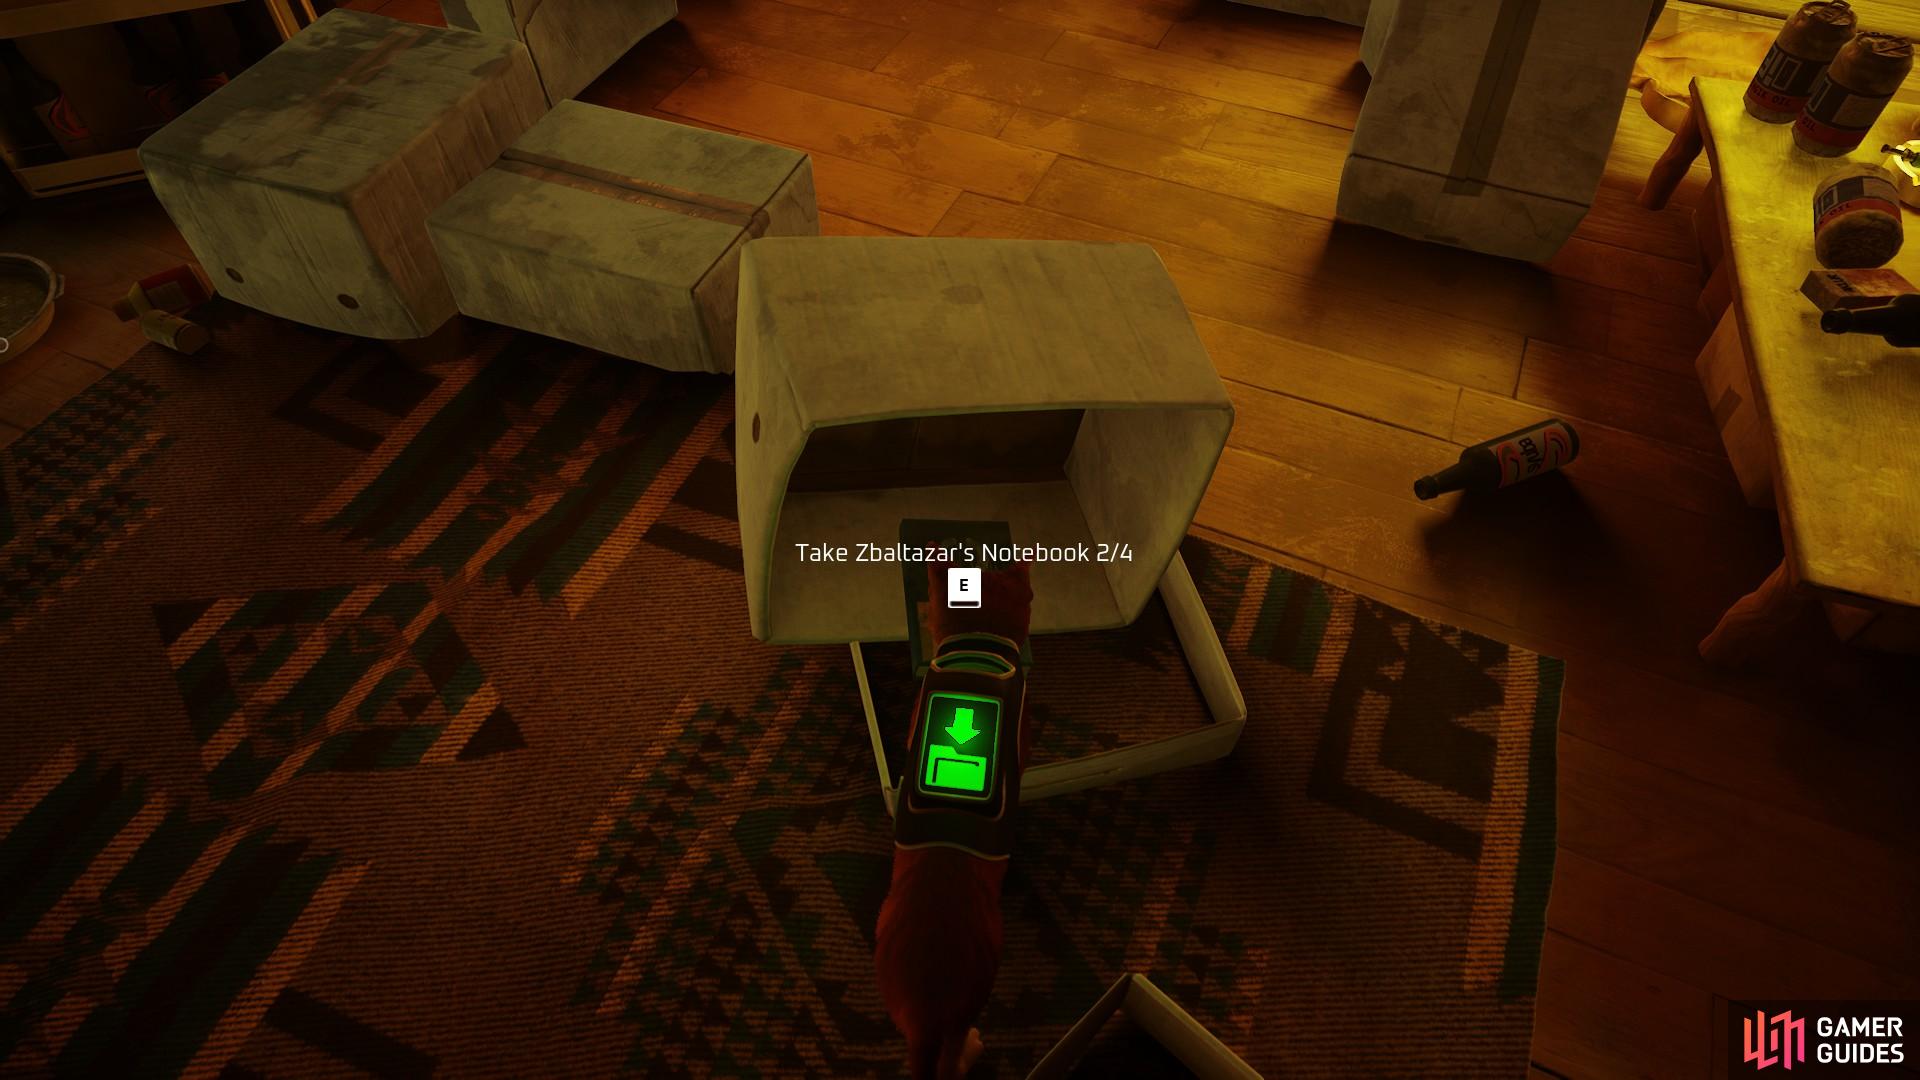 Topple the boxes in Zbaltazar's apartment and get the book from it.